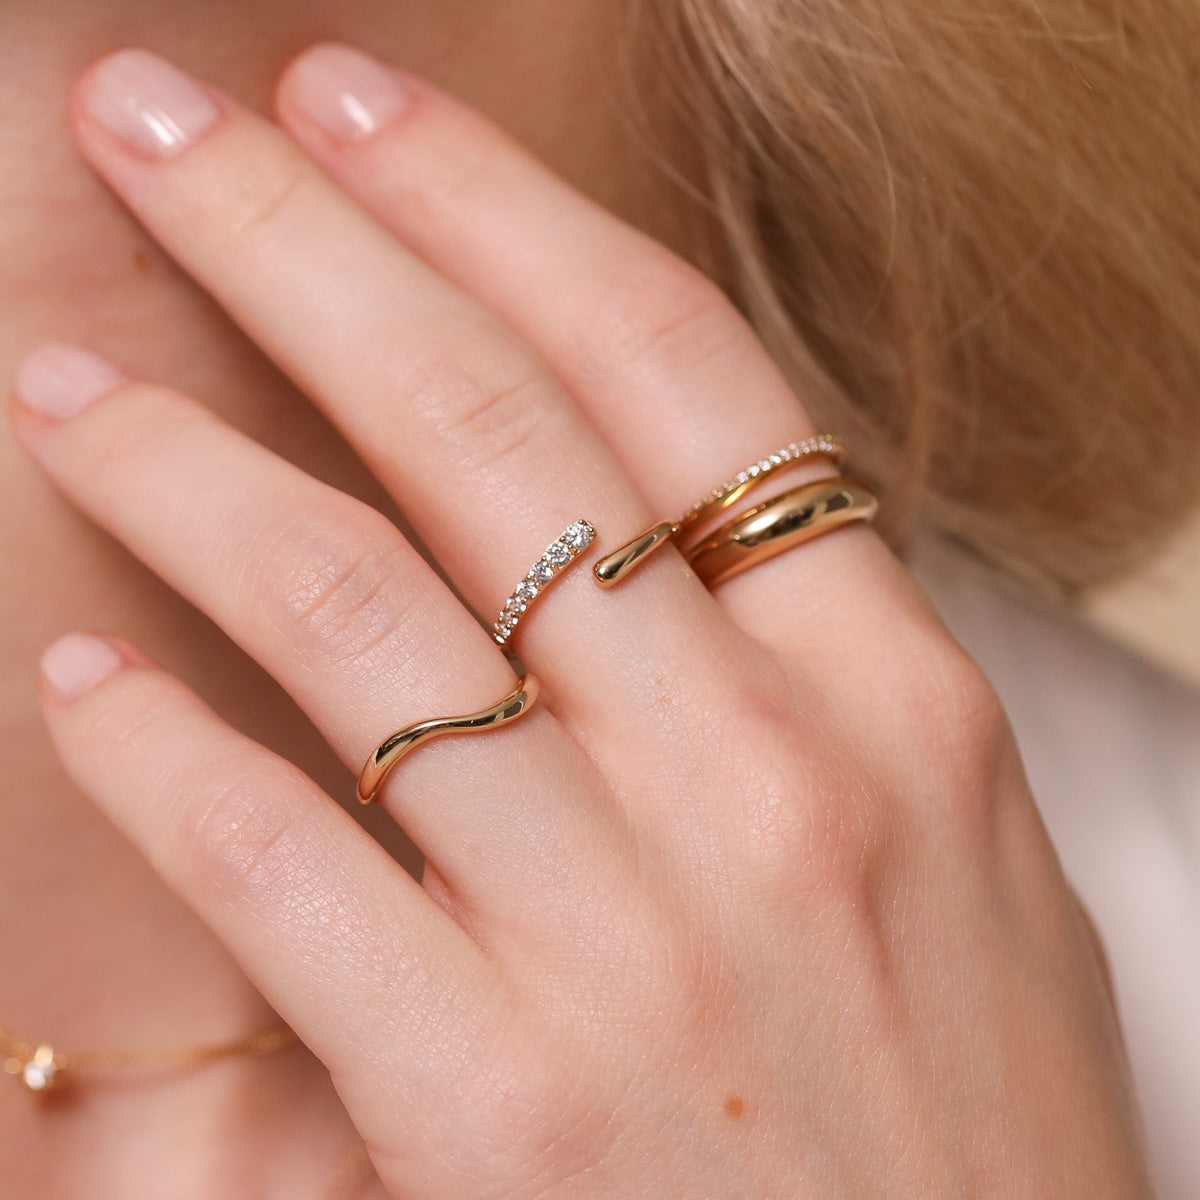 Orbit Crystal Ring in Gold worn with other rings